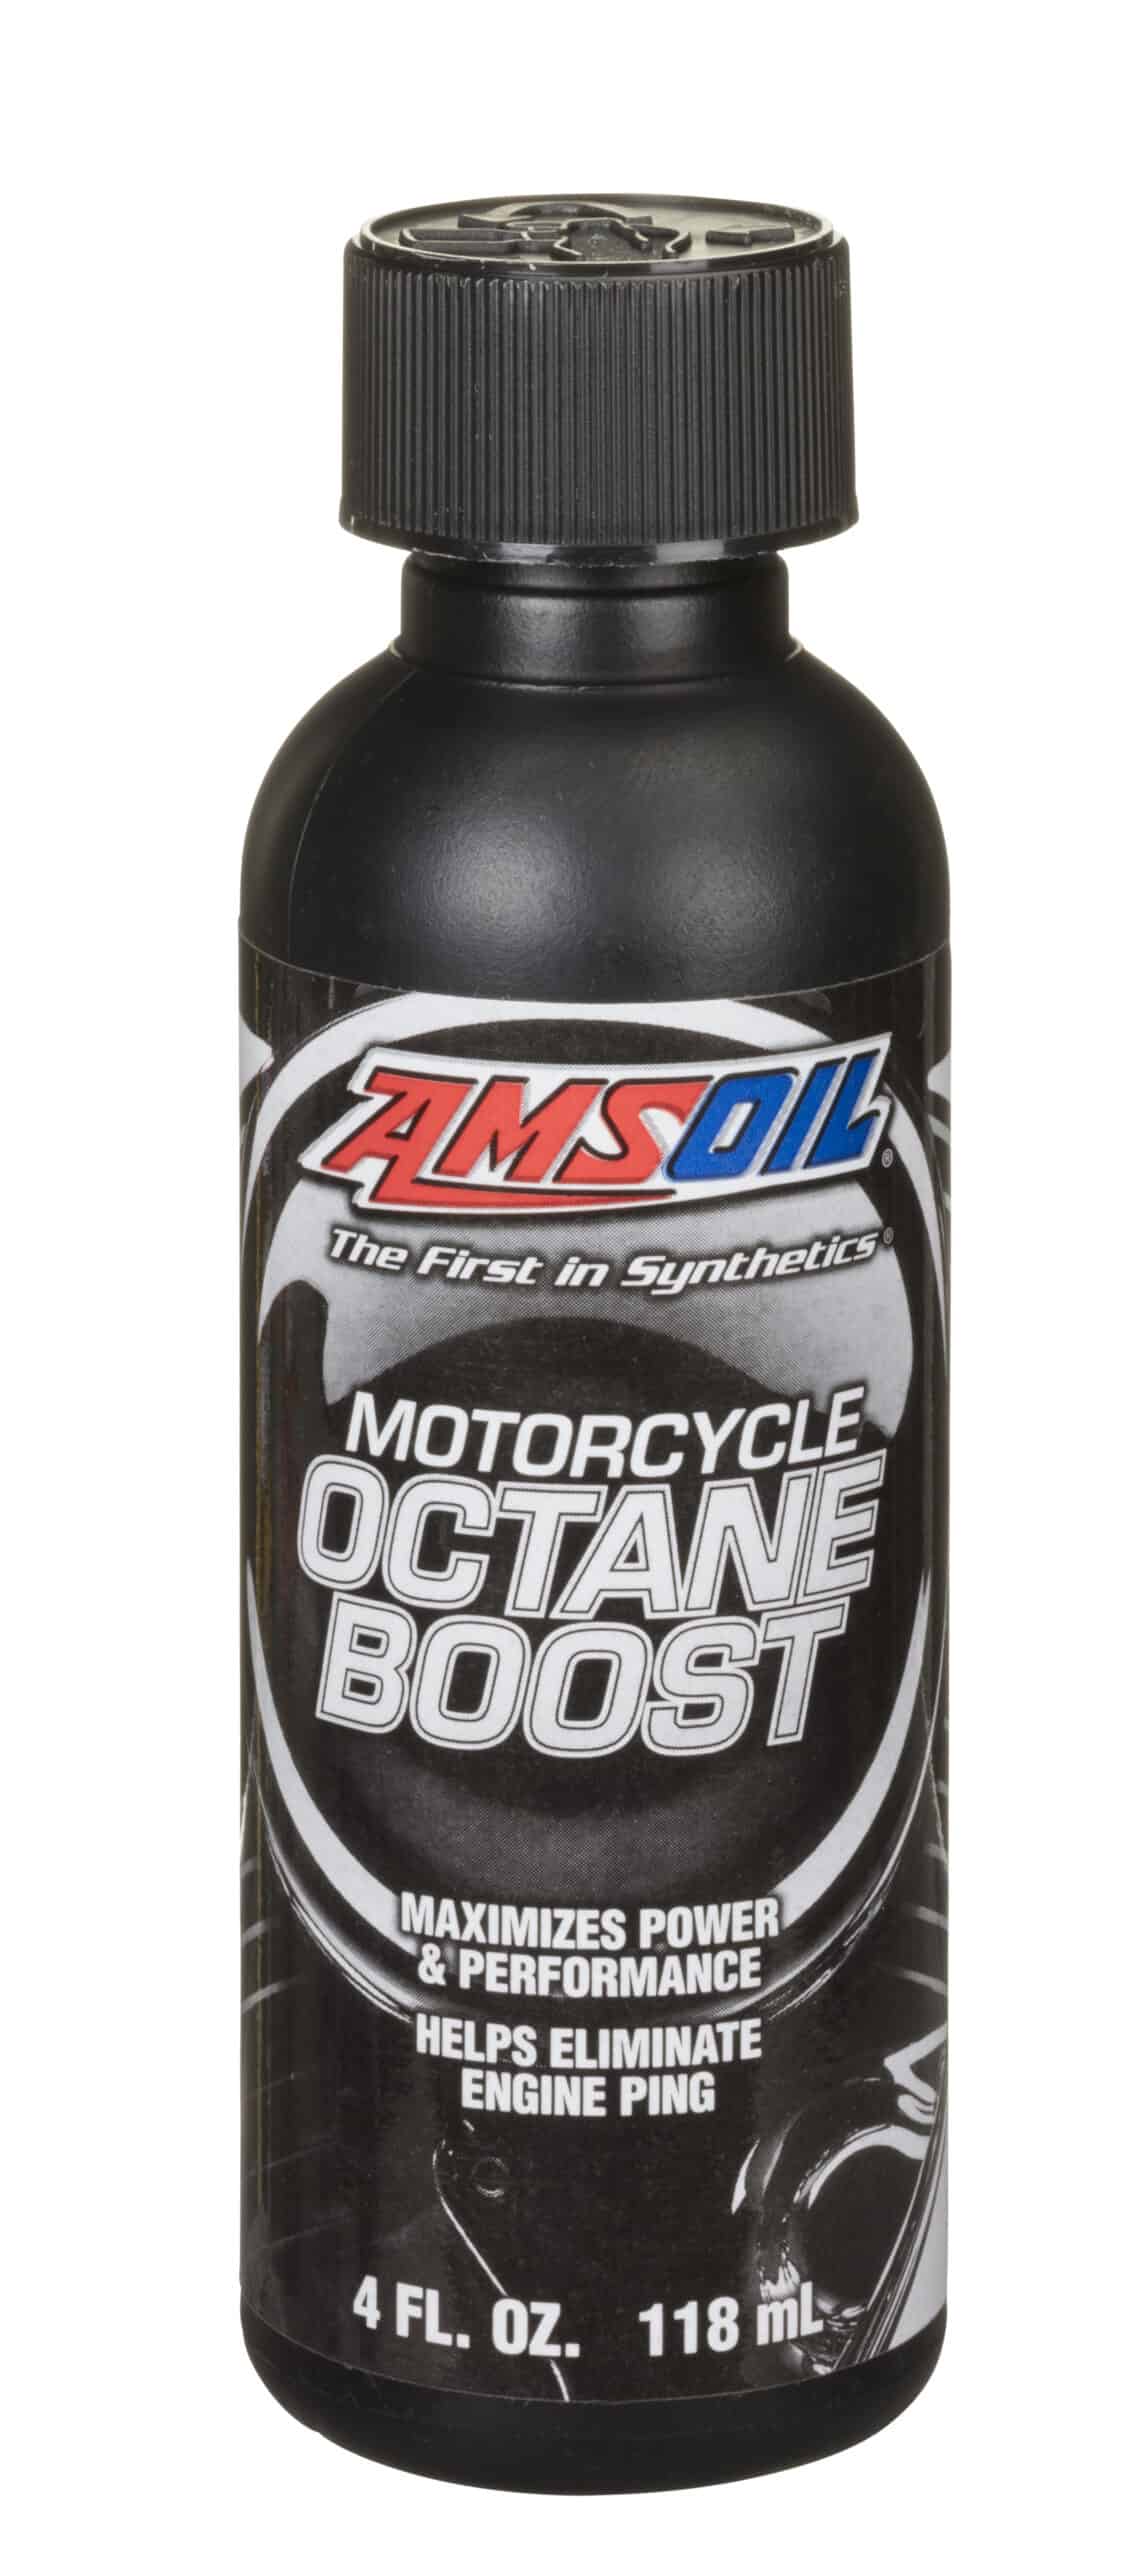 A bottle of AMSOIL Motorcycle Octane Boost, designed to improve startup performance & eliminate engine ping or knock for increased power at low-rpm operation. Good for your boat maintenance, when preparing it for storage.